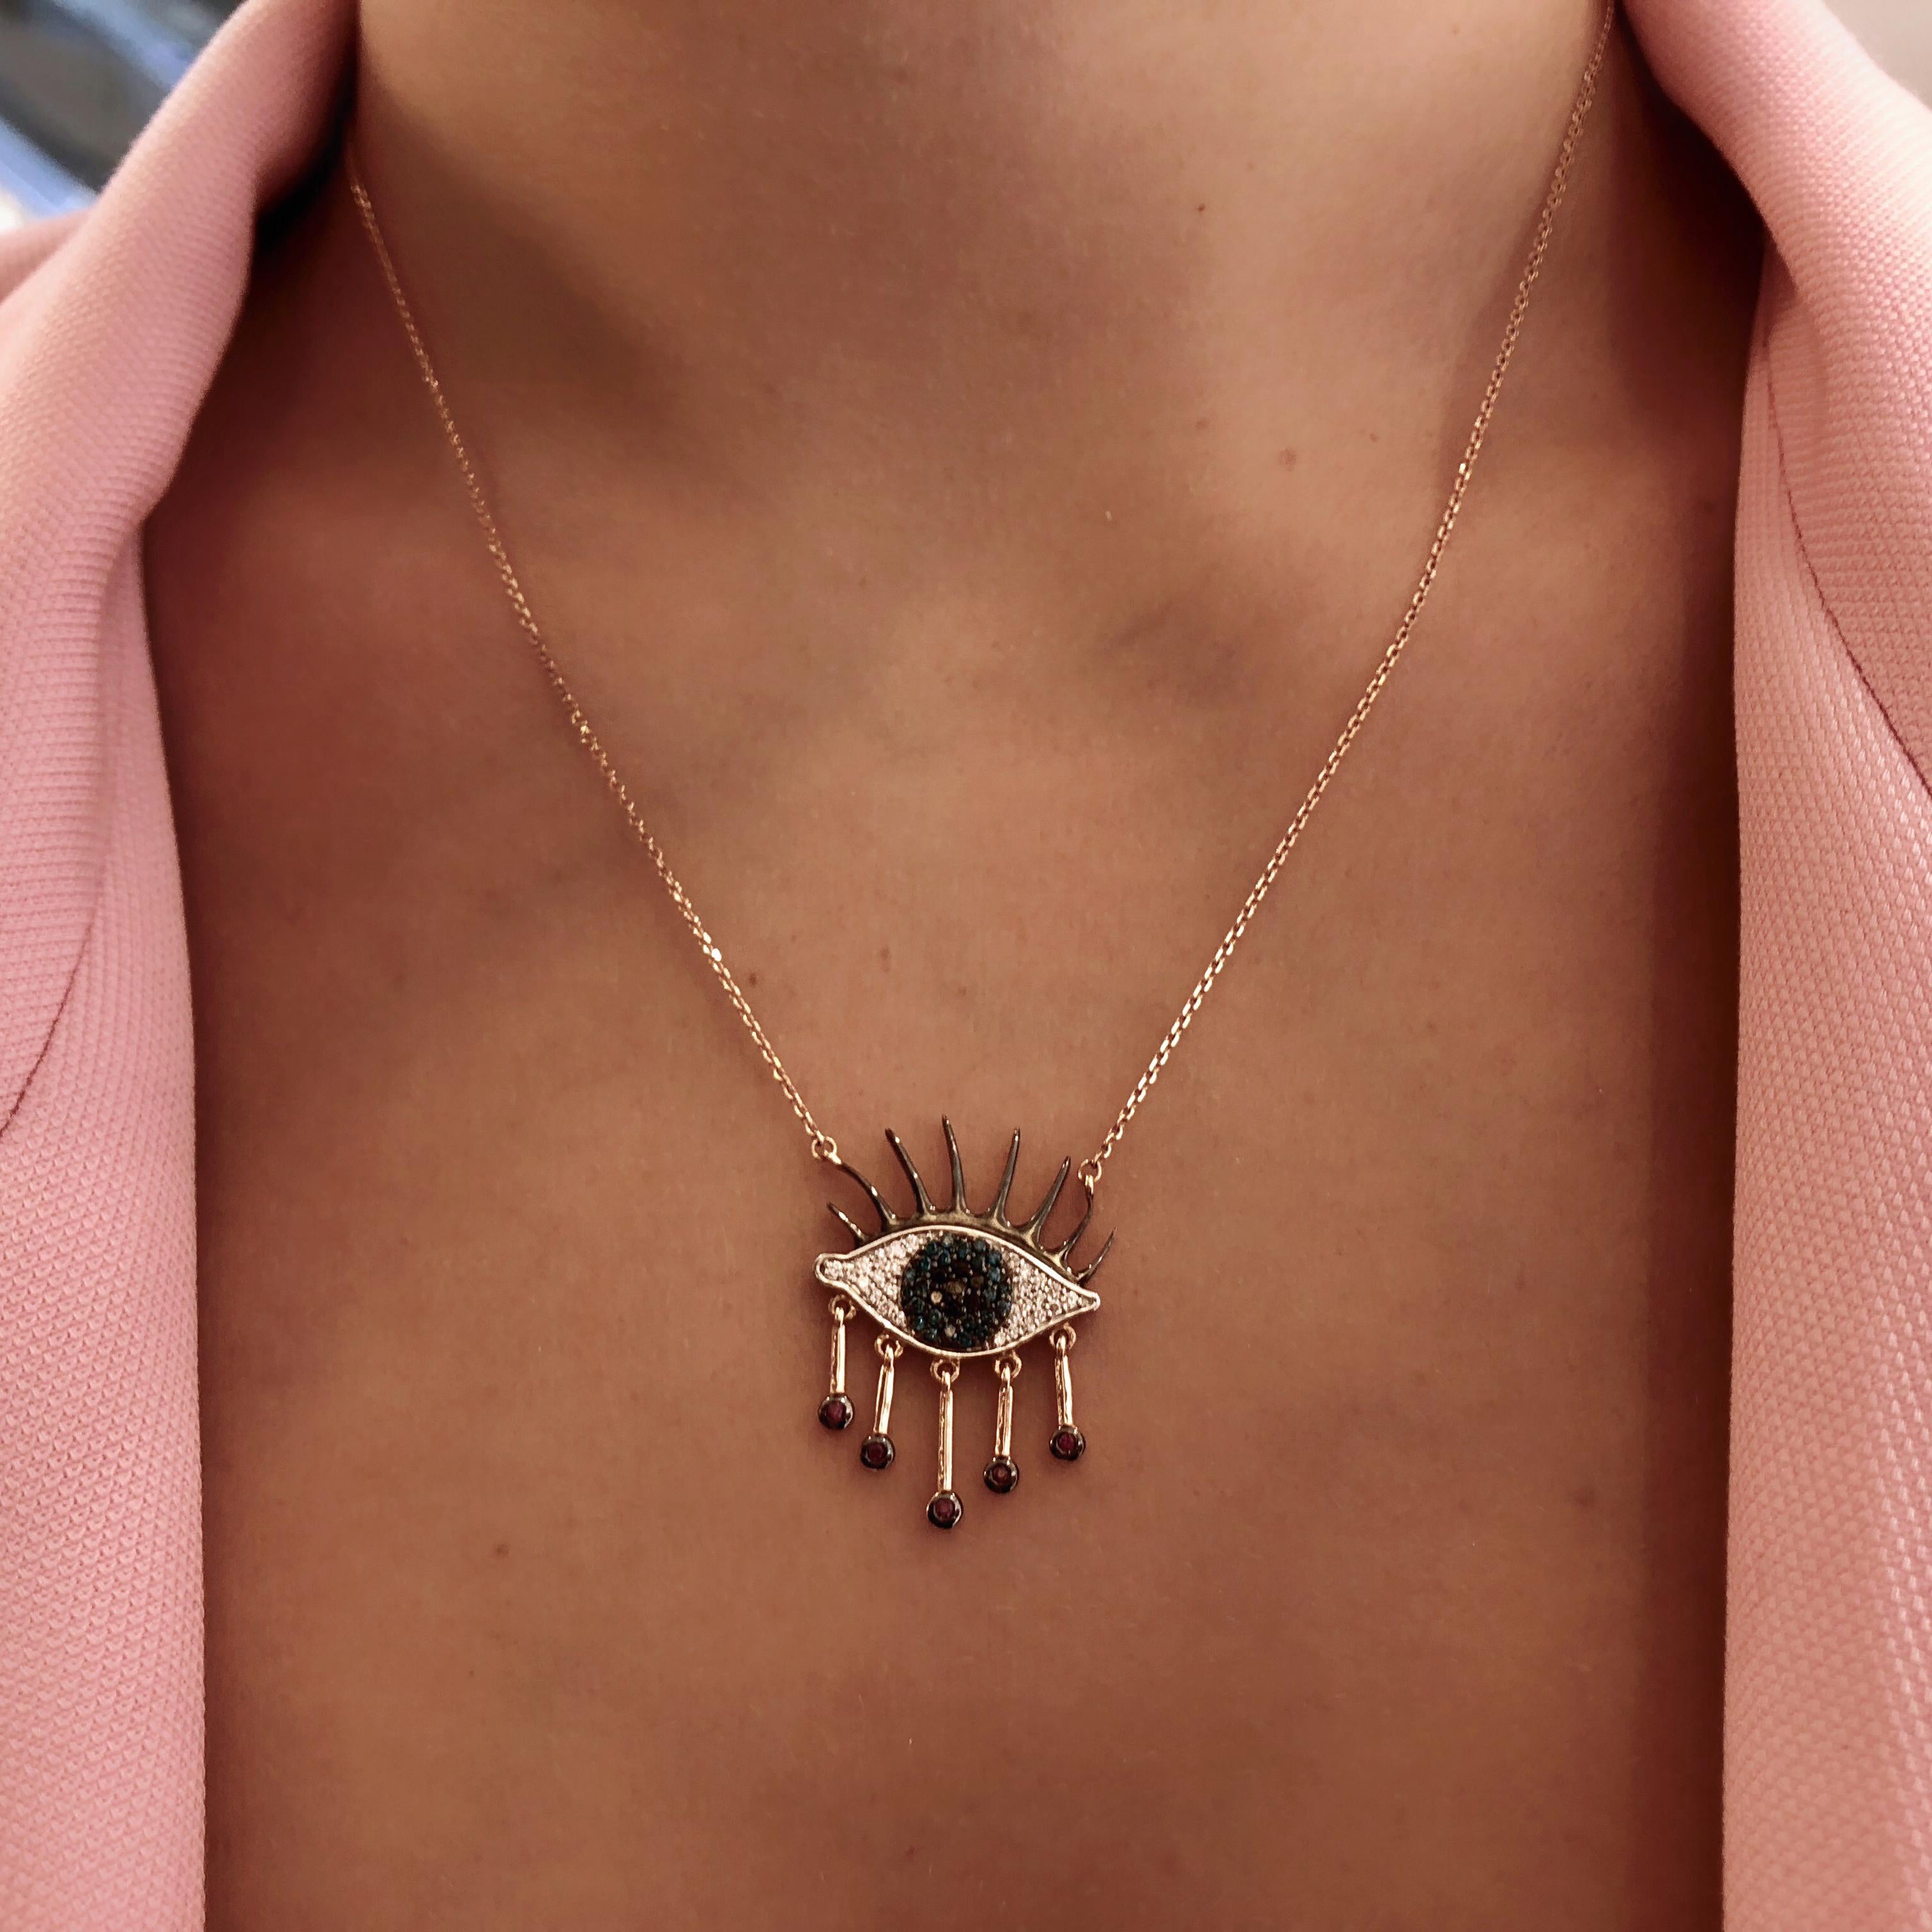 A talisman of awakening and new beginnings, the Eye Light Necklace is a contemporary and mystical design take on the timeless eye symbol. An expressive piece for the curious and creative; it gifts the wearer a new outlook and the inspiration to turn